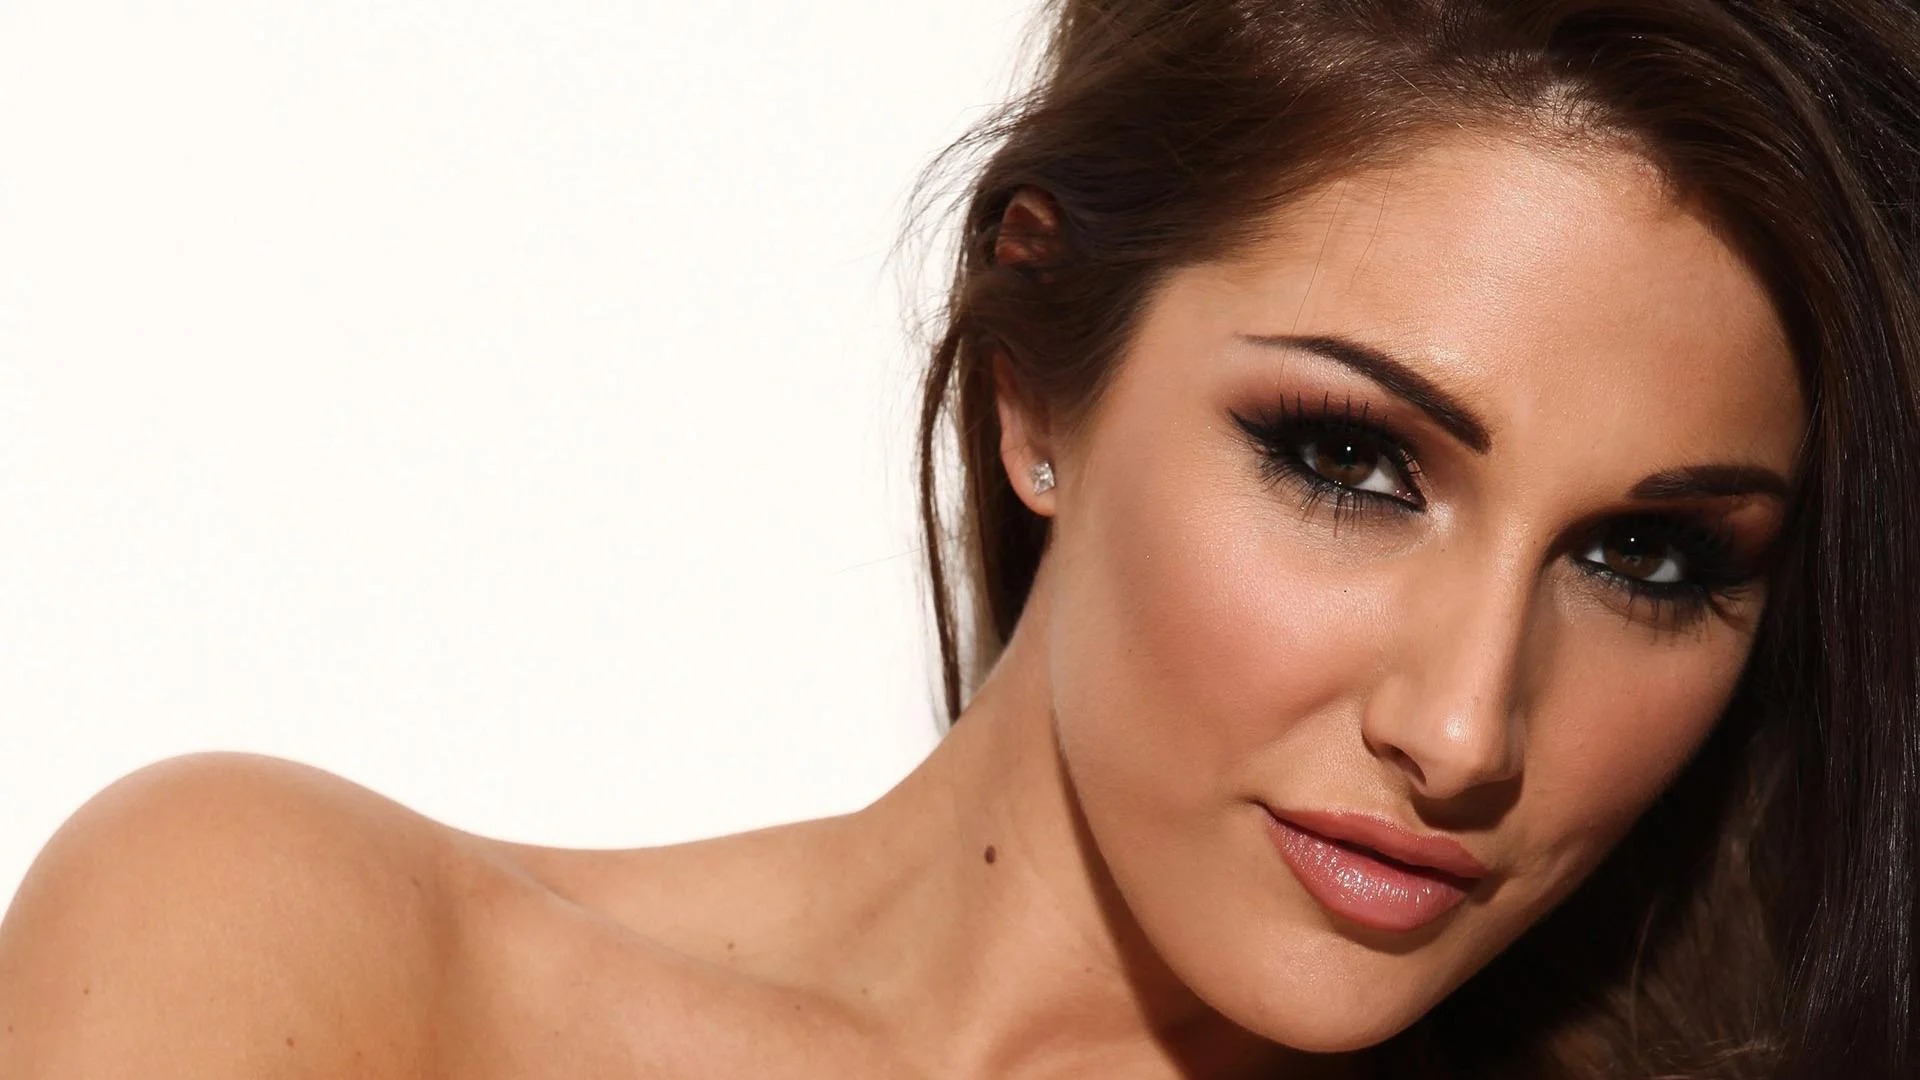 13 Extraordinary Facts About Lucy Pinder - Facts.net